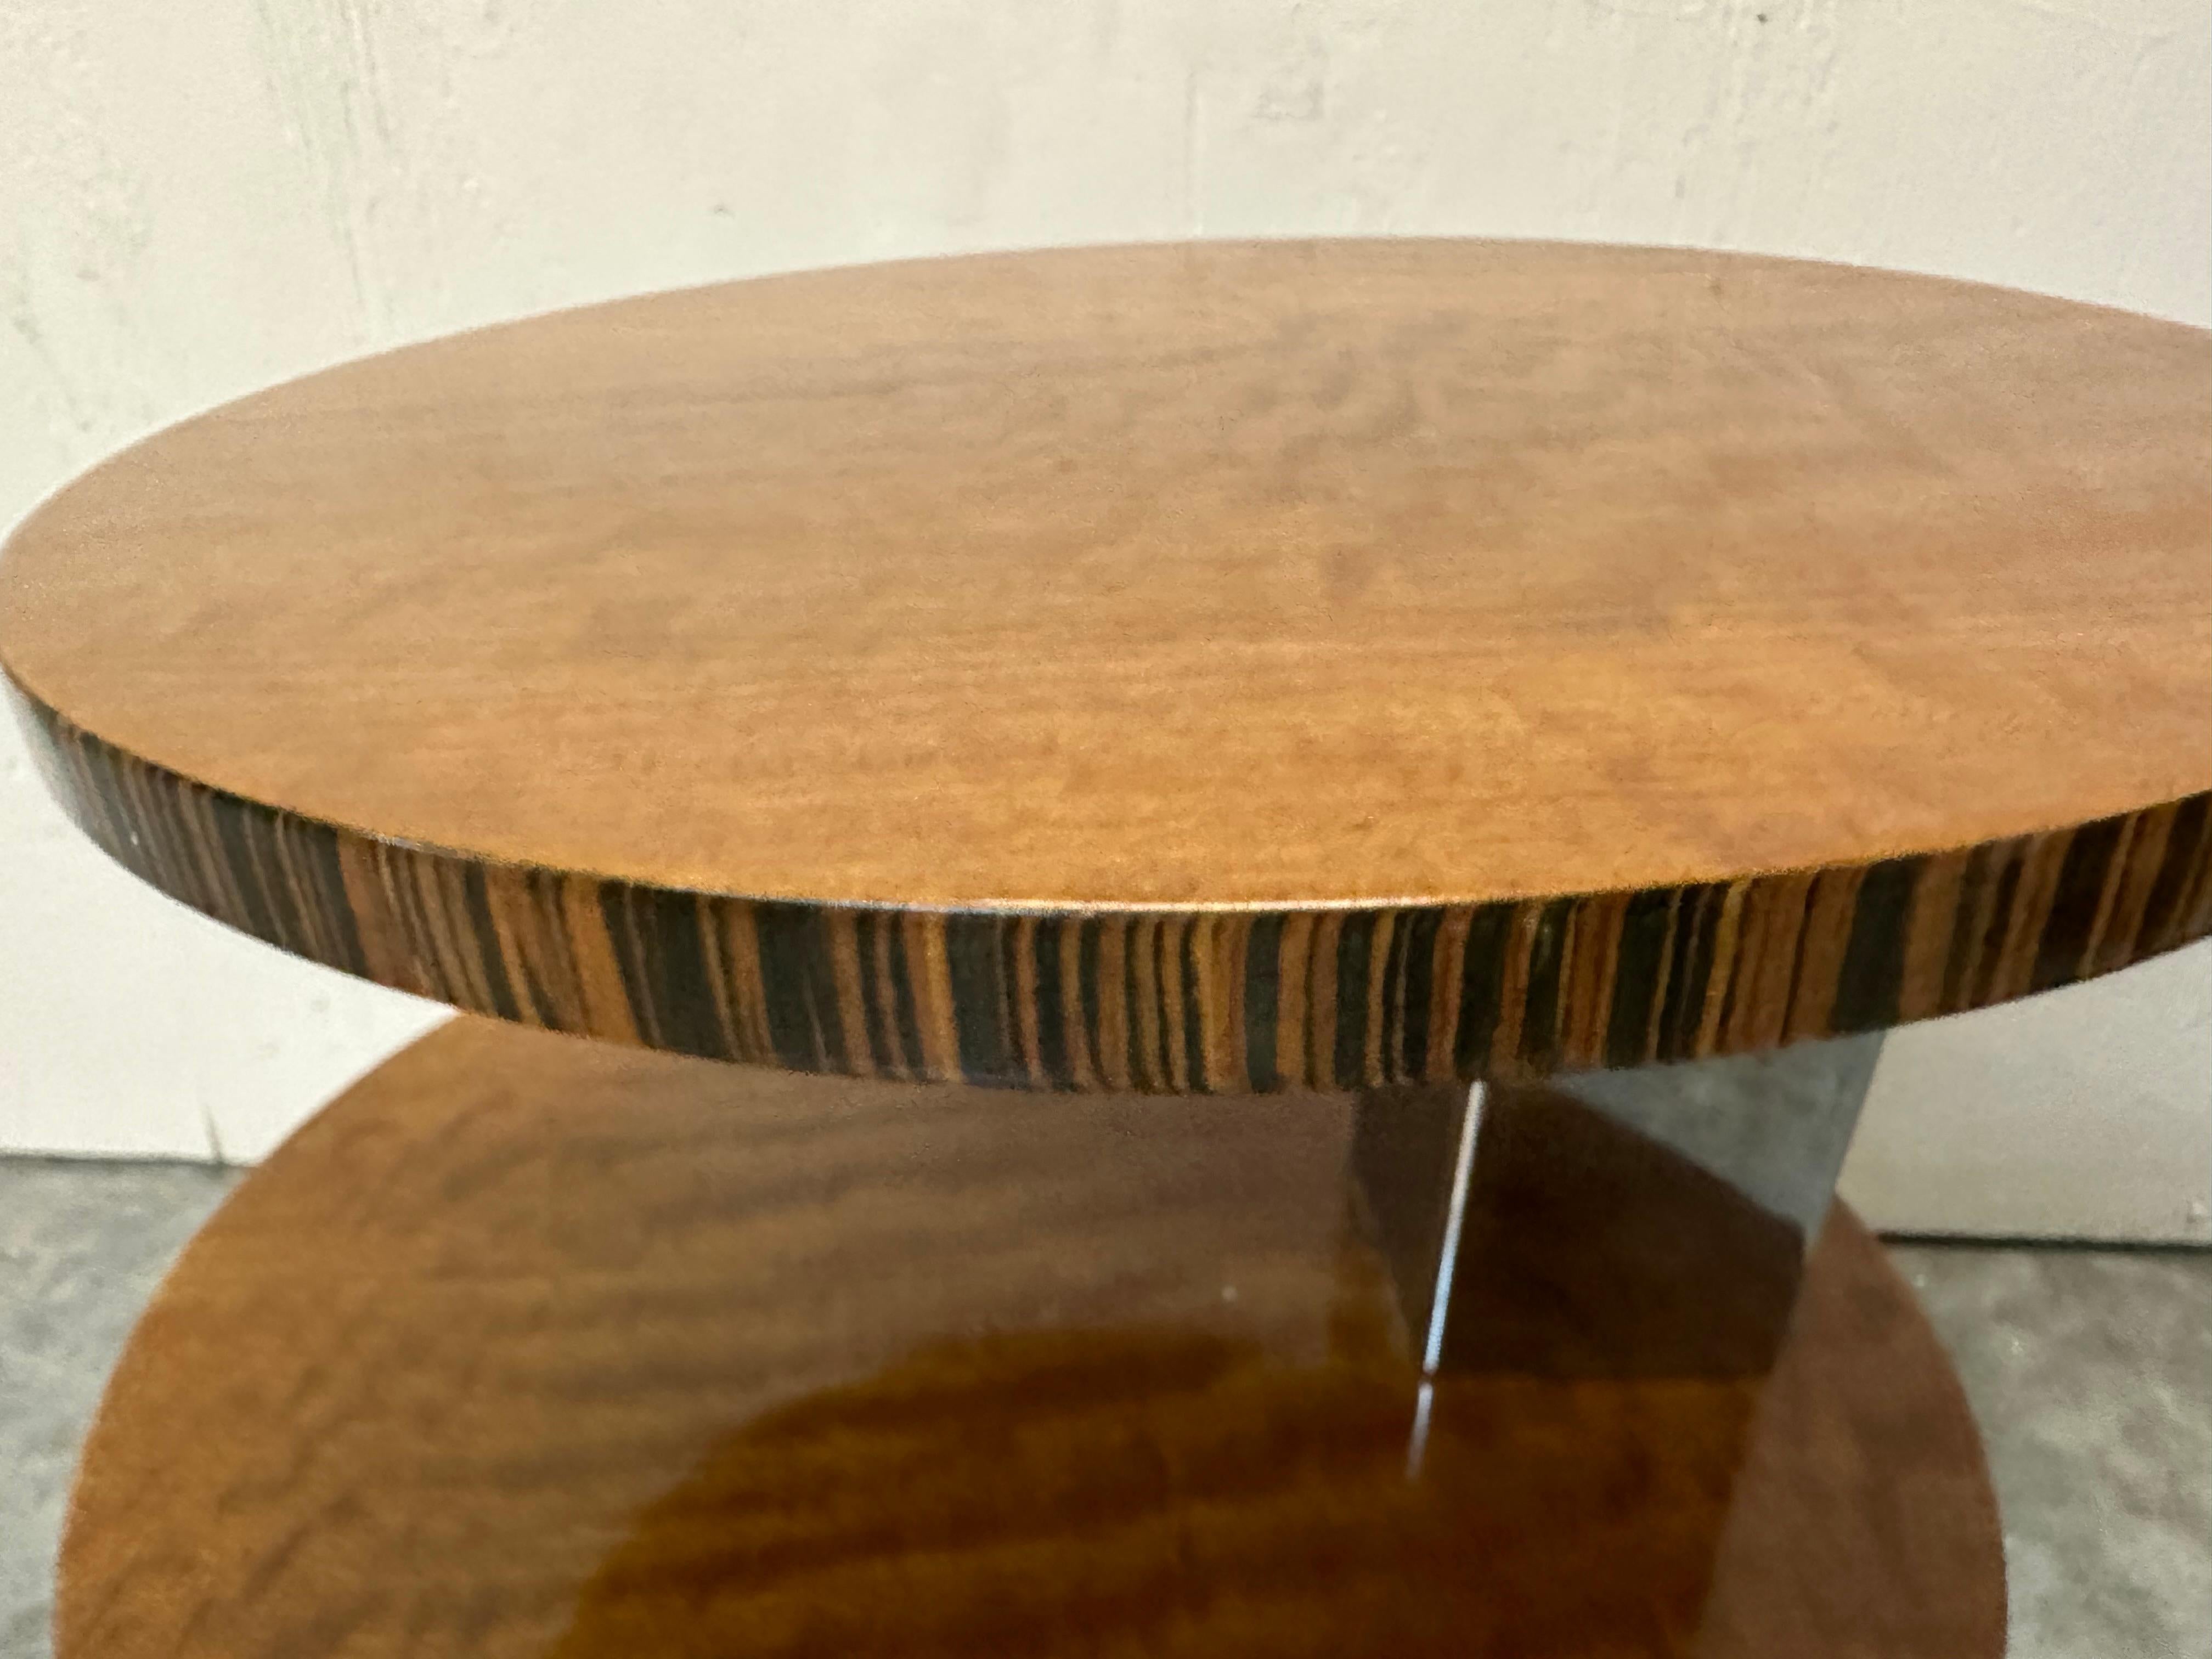 Three Tier Table 'Attributed to the Bauhaus' German For Sale 9